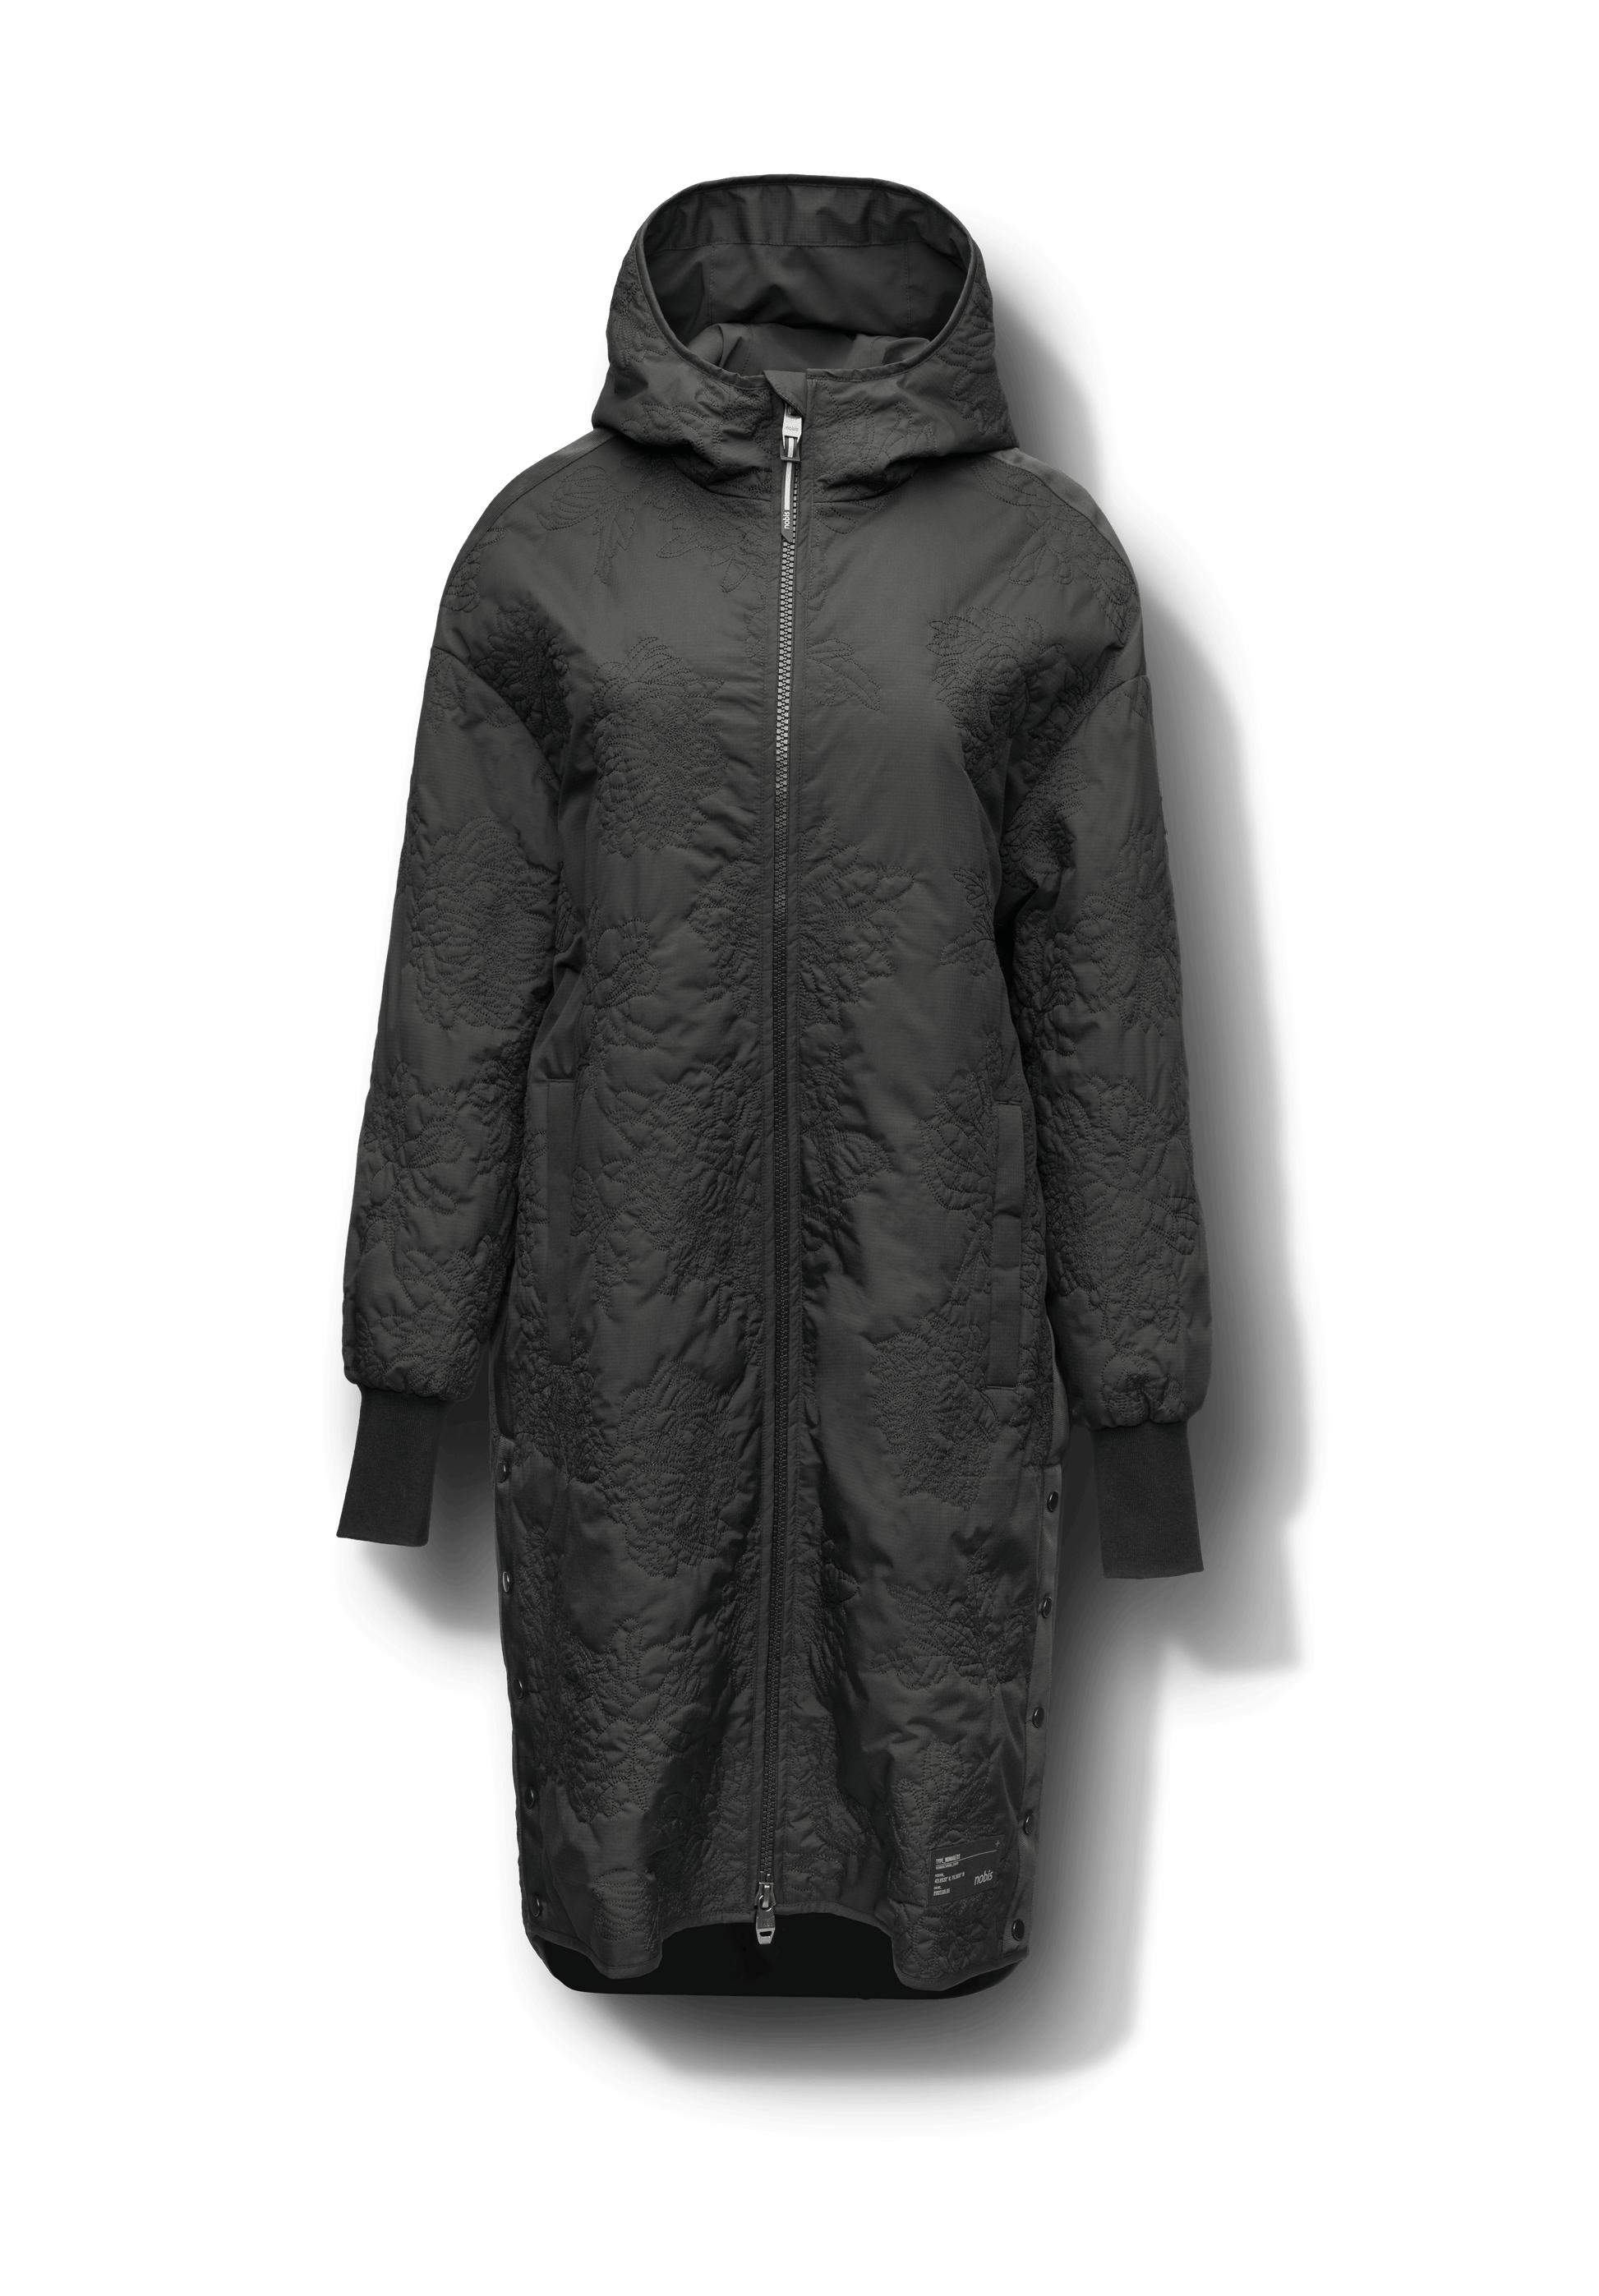 Surrey Women's Performance Quilted Long Mid Layer Jacket in knee length, Primaloft Gold Insulation Active+, non-removable hood, single welt magnetic closure pockets, ribbed cuffs, two-way centre front zipper, grosgrain ribbon detail and shoulders and side seam, and snap closure side seam vents, in Black